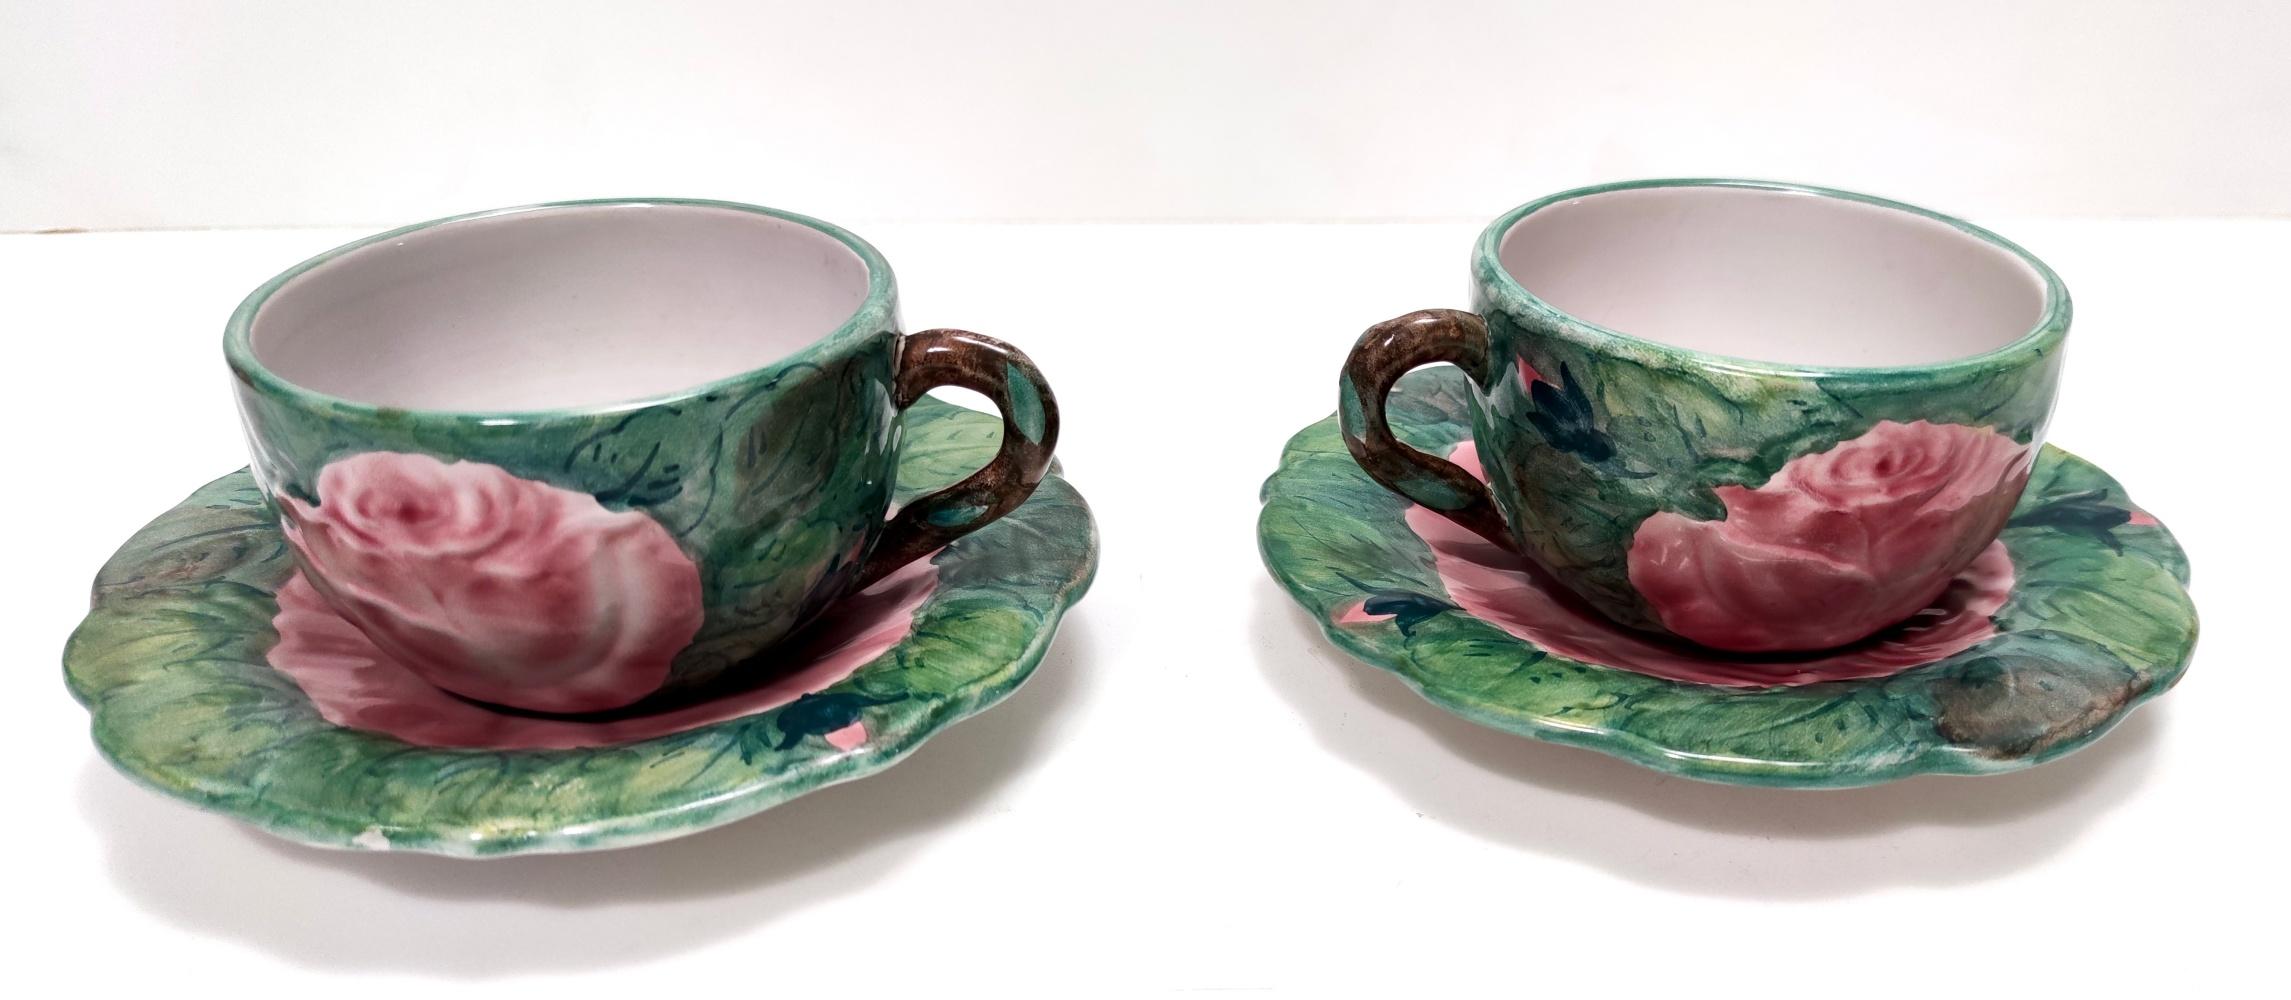 Pair of Vintage Earthenware Tea /Coffee Cups with Floral Motifs by Zaccagnini For Sale 5